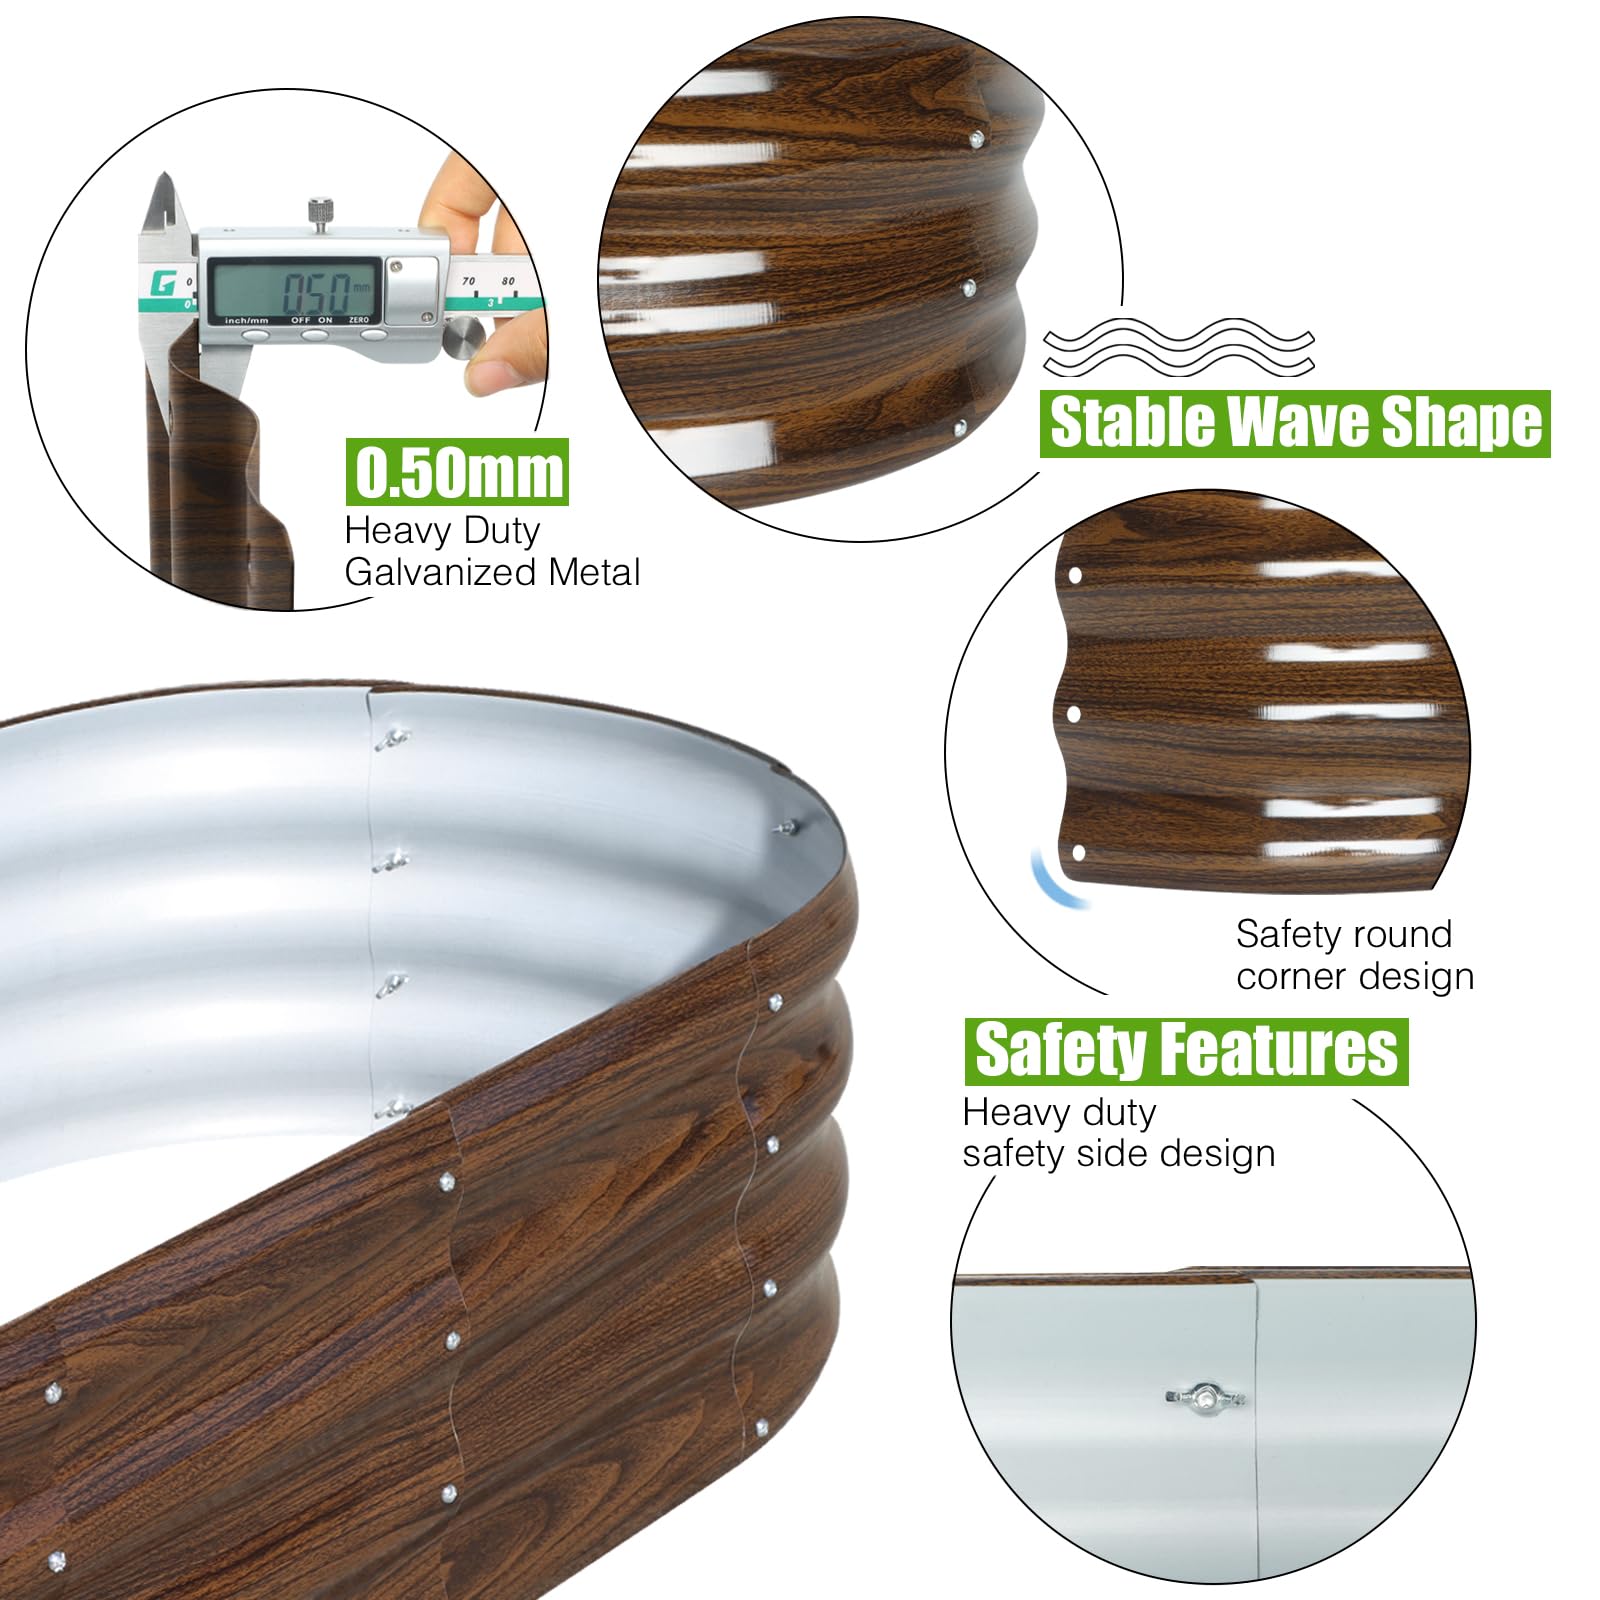 SnugNiture Galvanized Raised Garden Bed Outdoor, 2 Pcs 4x2x1ft Oval Metal Planter Box for Planting Plants Vegetables, Brown